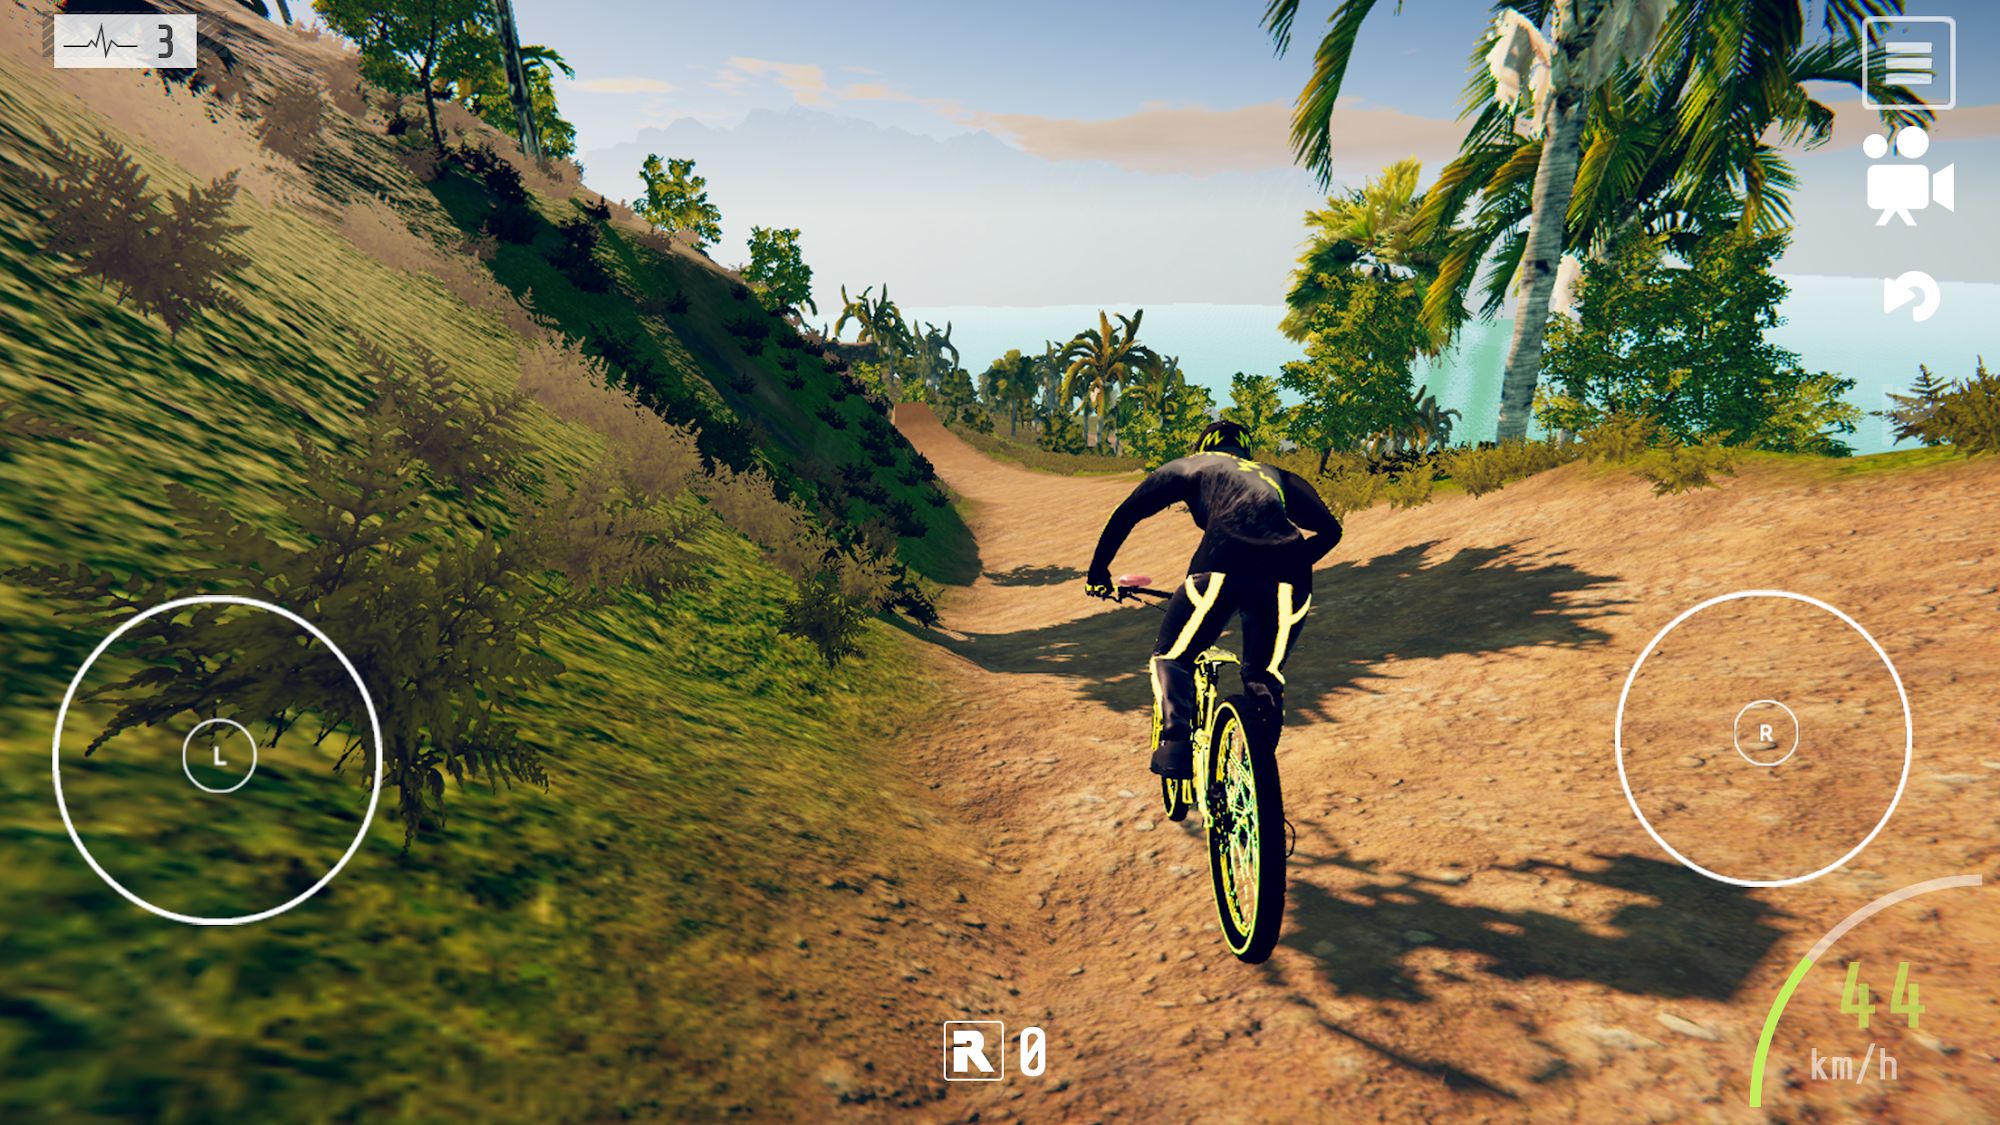 Descenders - Android game screenshots.